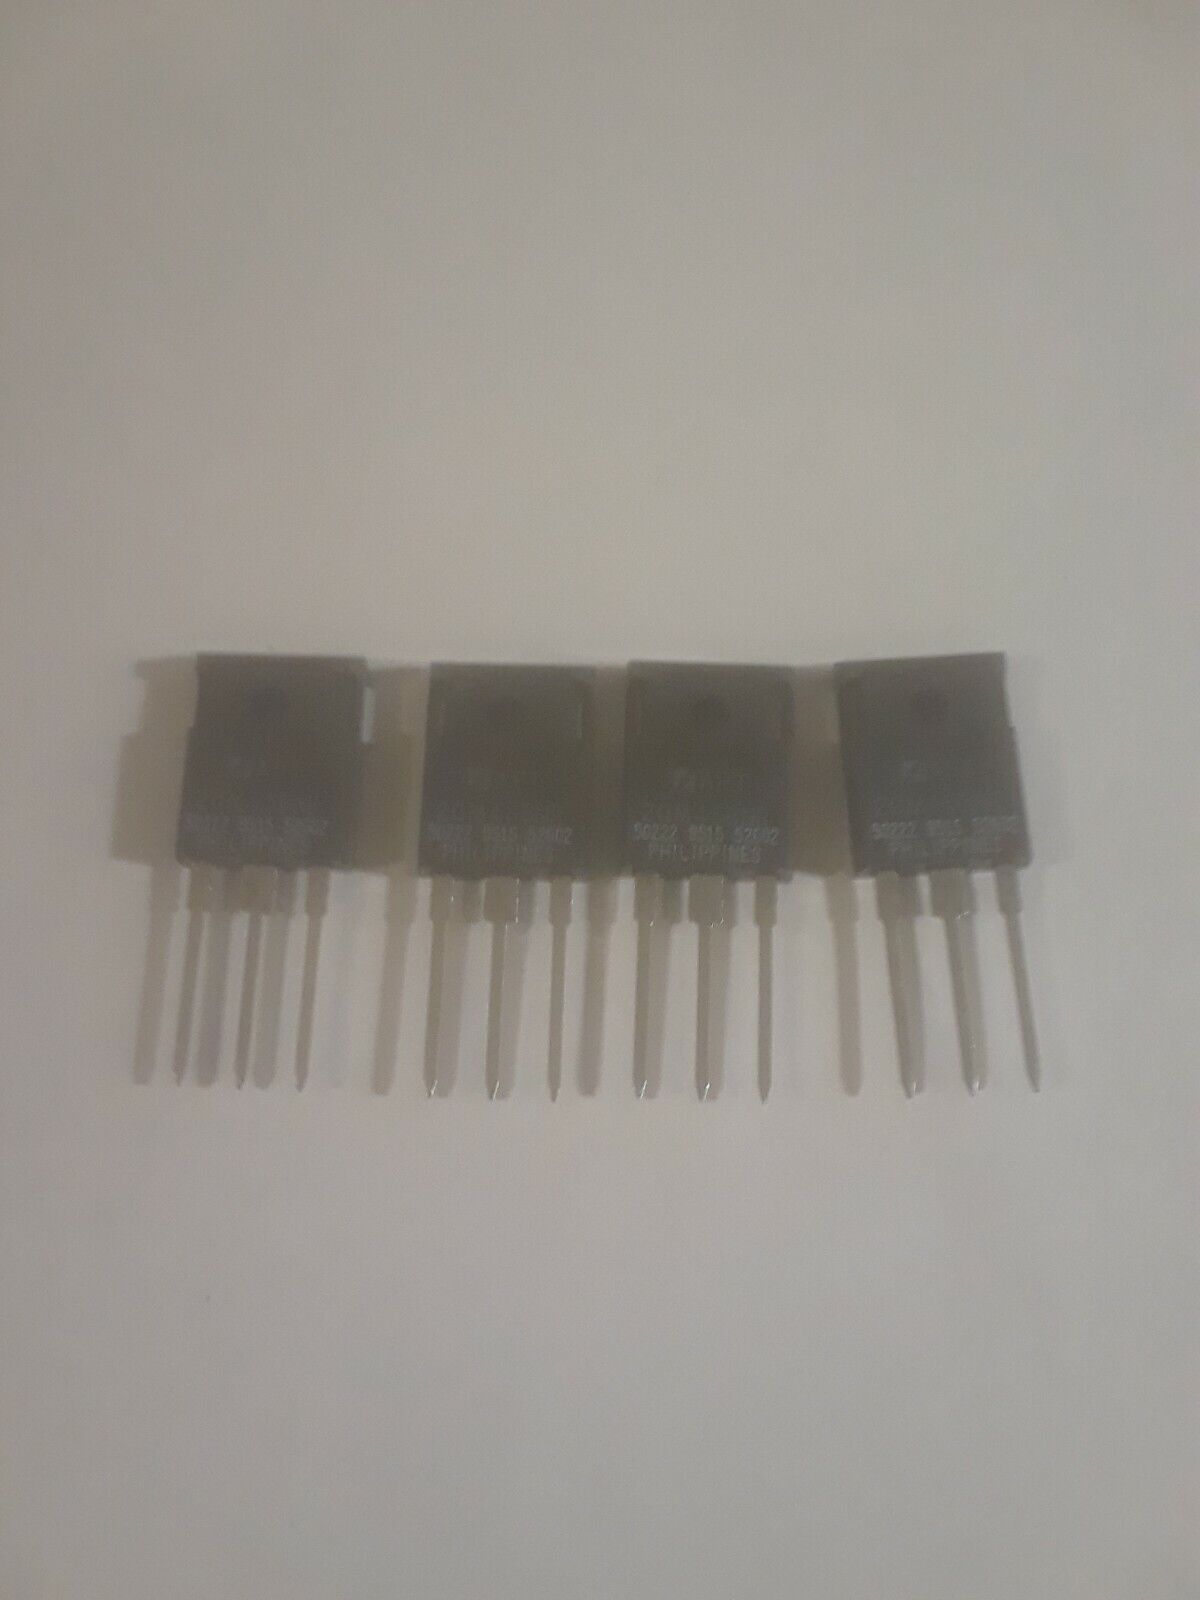 4 PCS, 20M45BNR, N CHANNEL MOSFET, TO-247, 200 V, 56 A